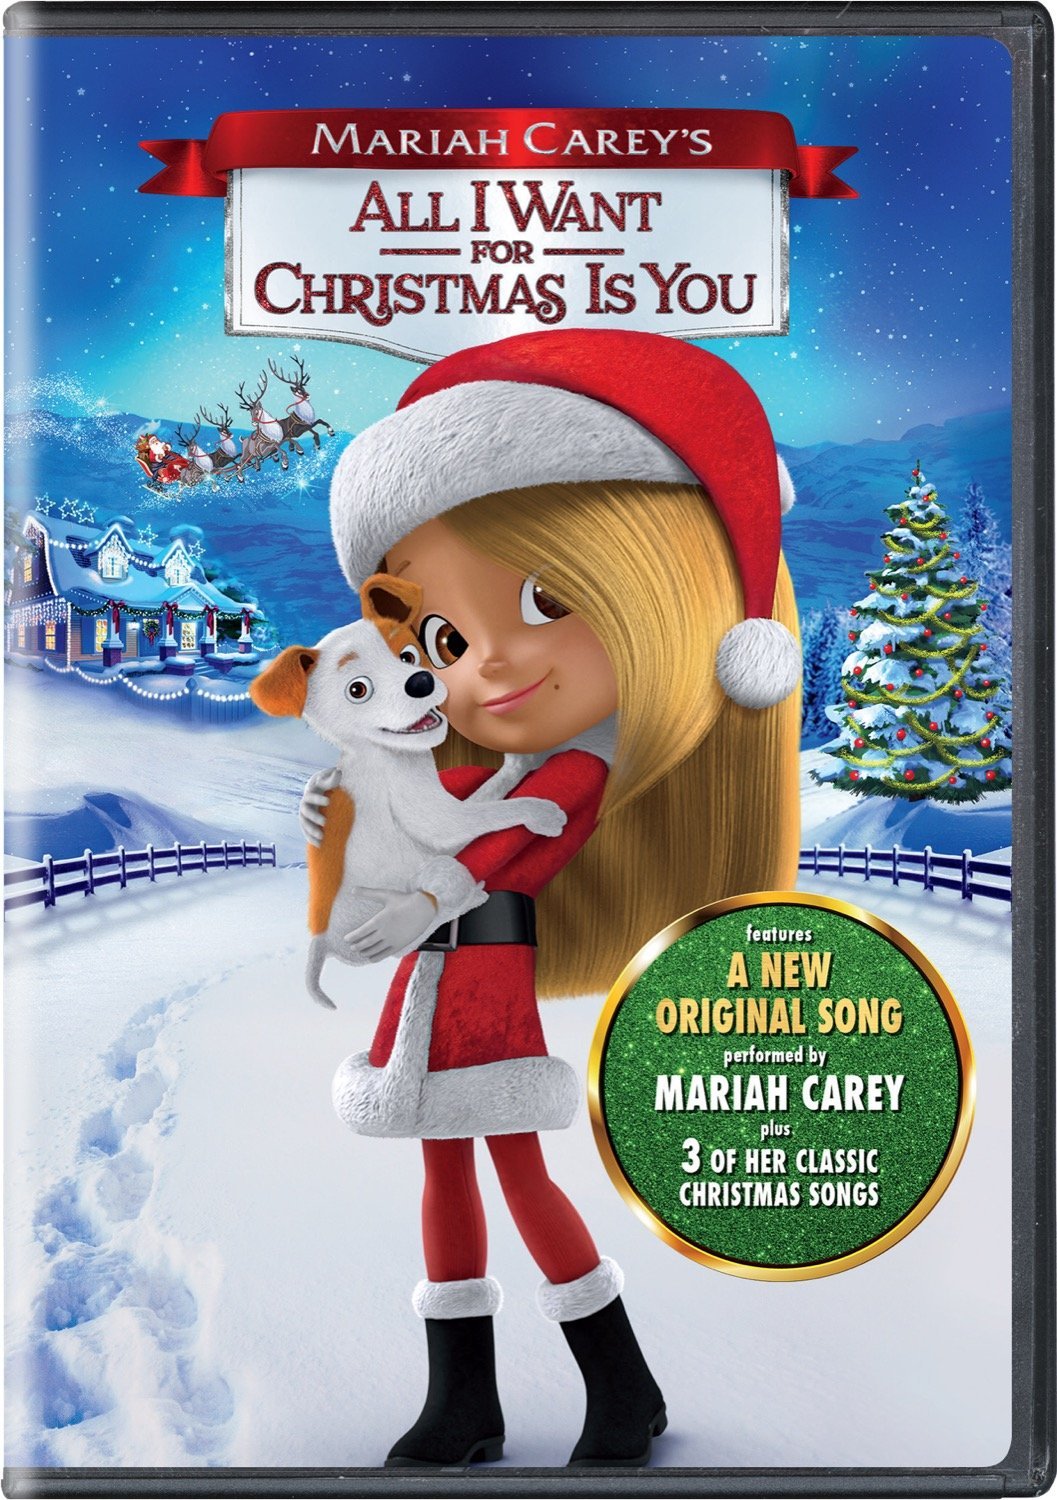 Mariah Careys All I Want For Christmas Is You Arrives On Blu Ray And Dvd